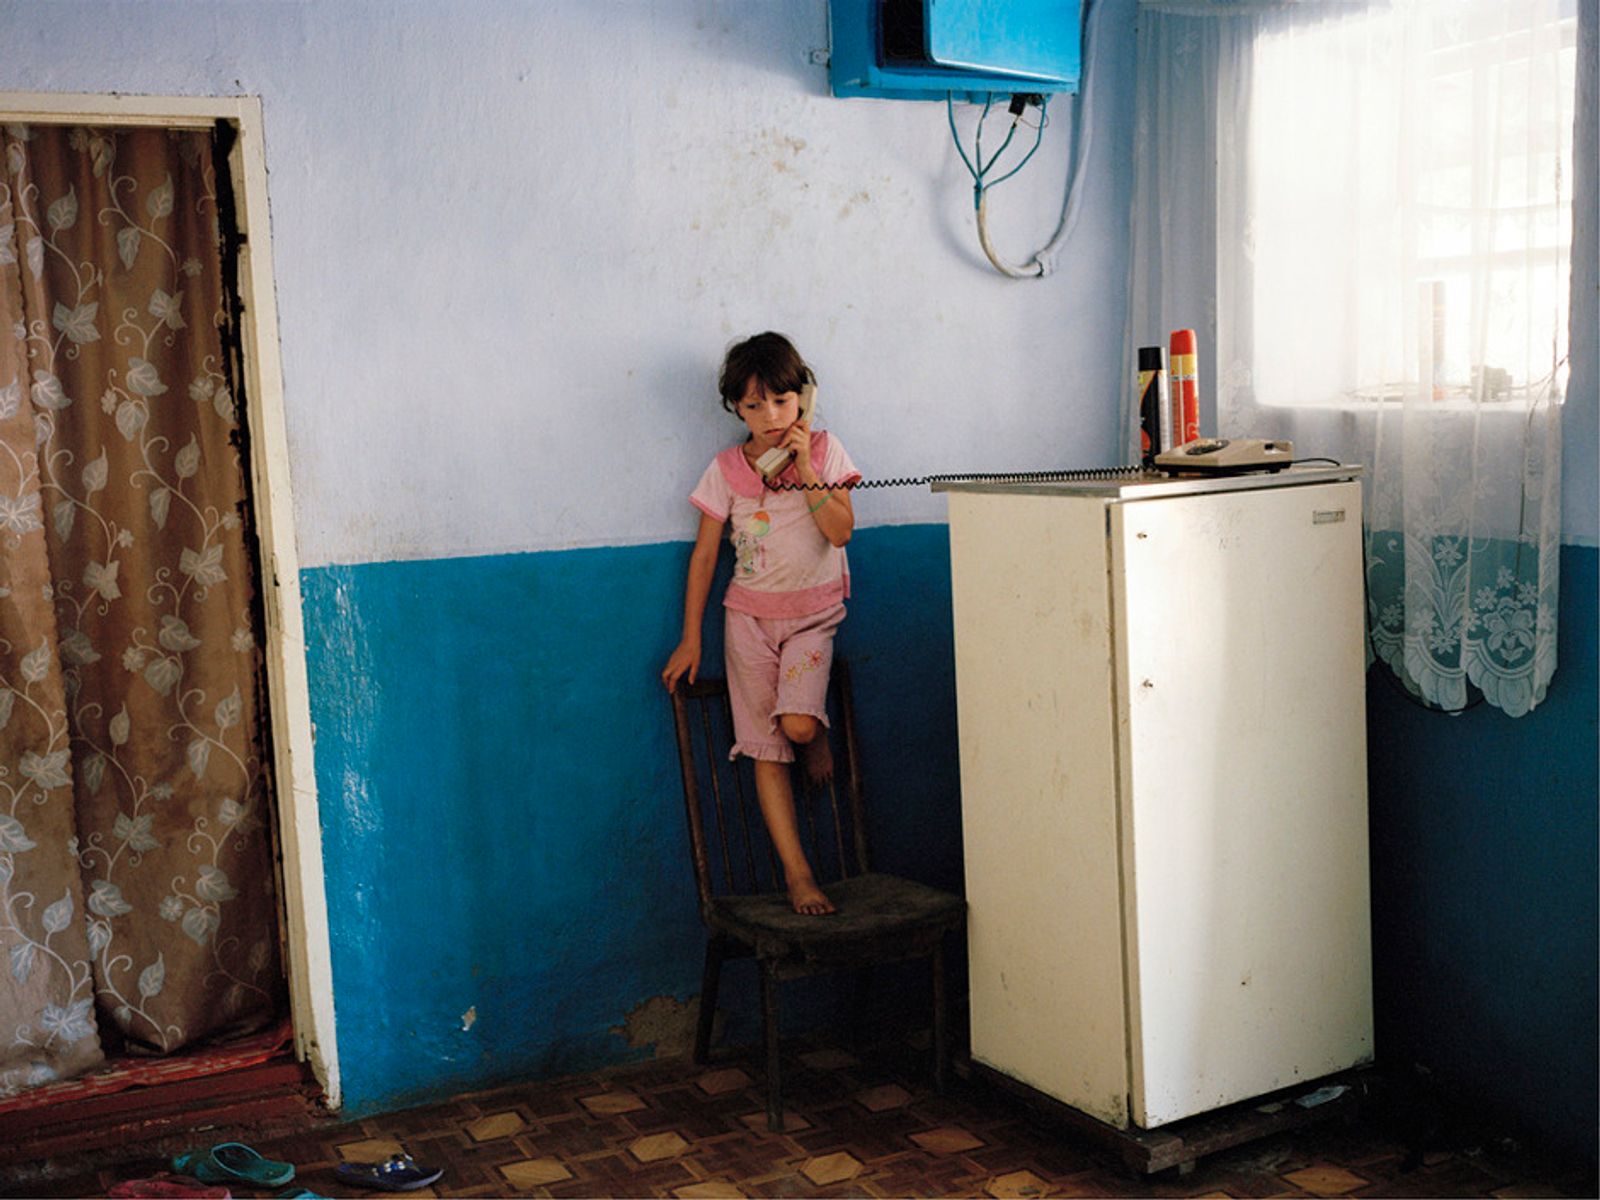 © Andrea Diefenbach - Image from the LAND OHNE ELTERN / Country without parents photography project